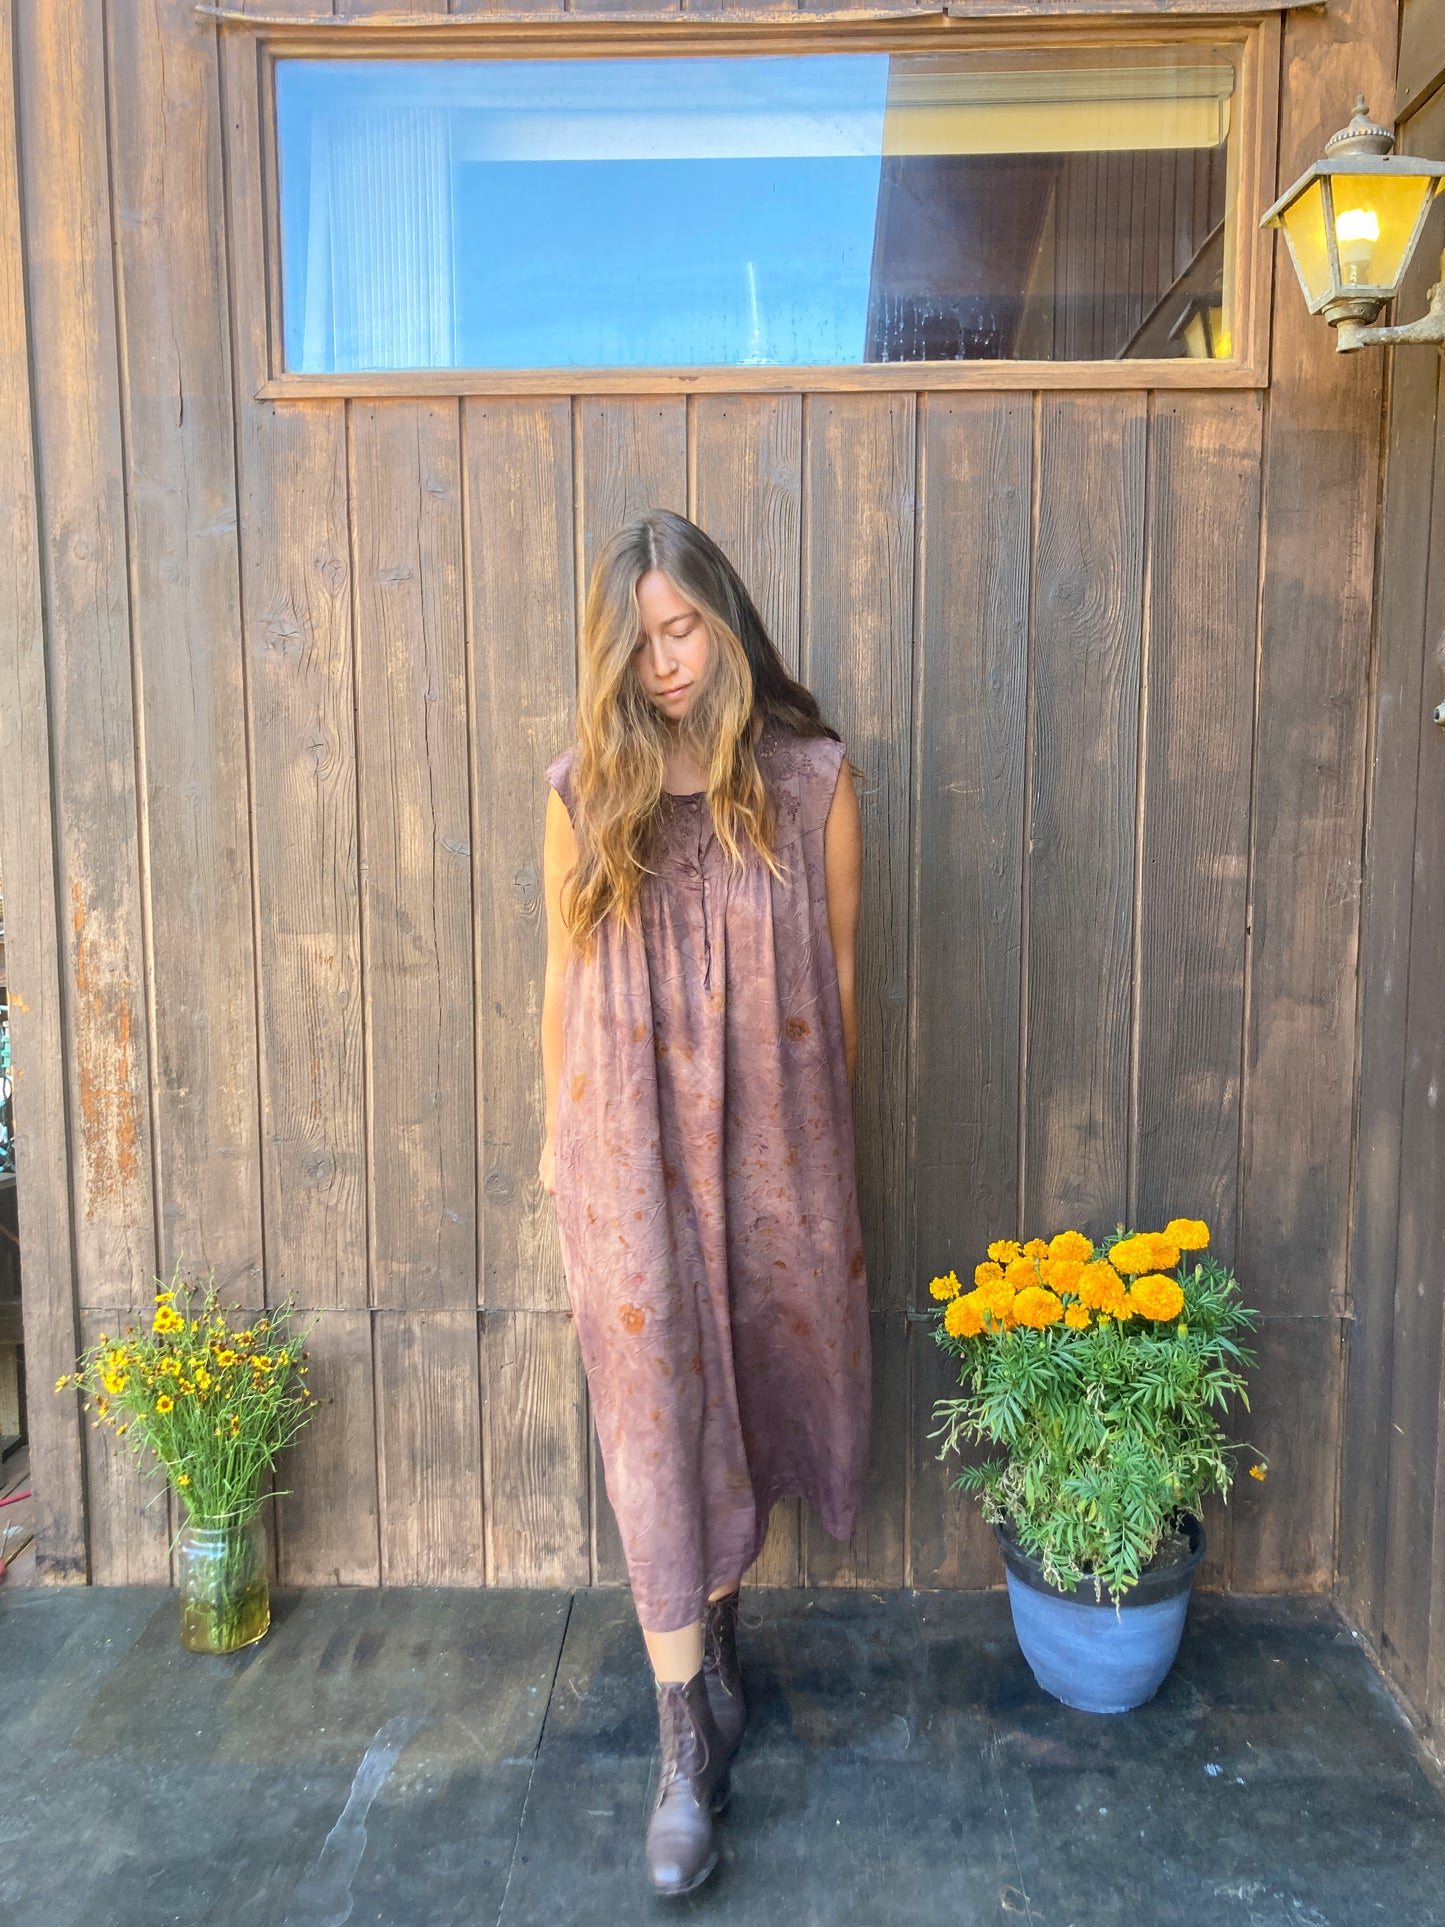 Sequoia, Madder, Coreopsis, Cosmo Silk Bundle Dyed Dream Dress